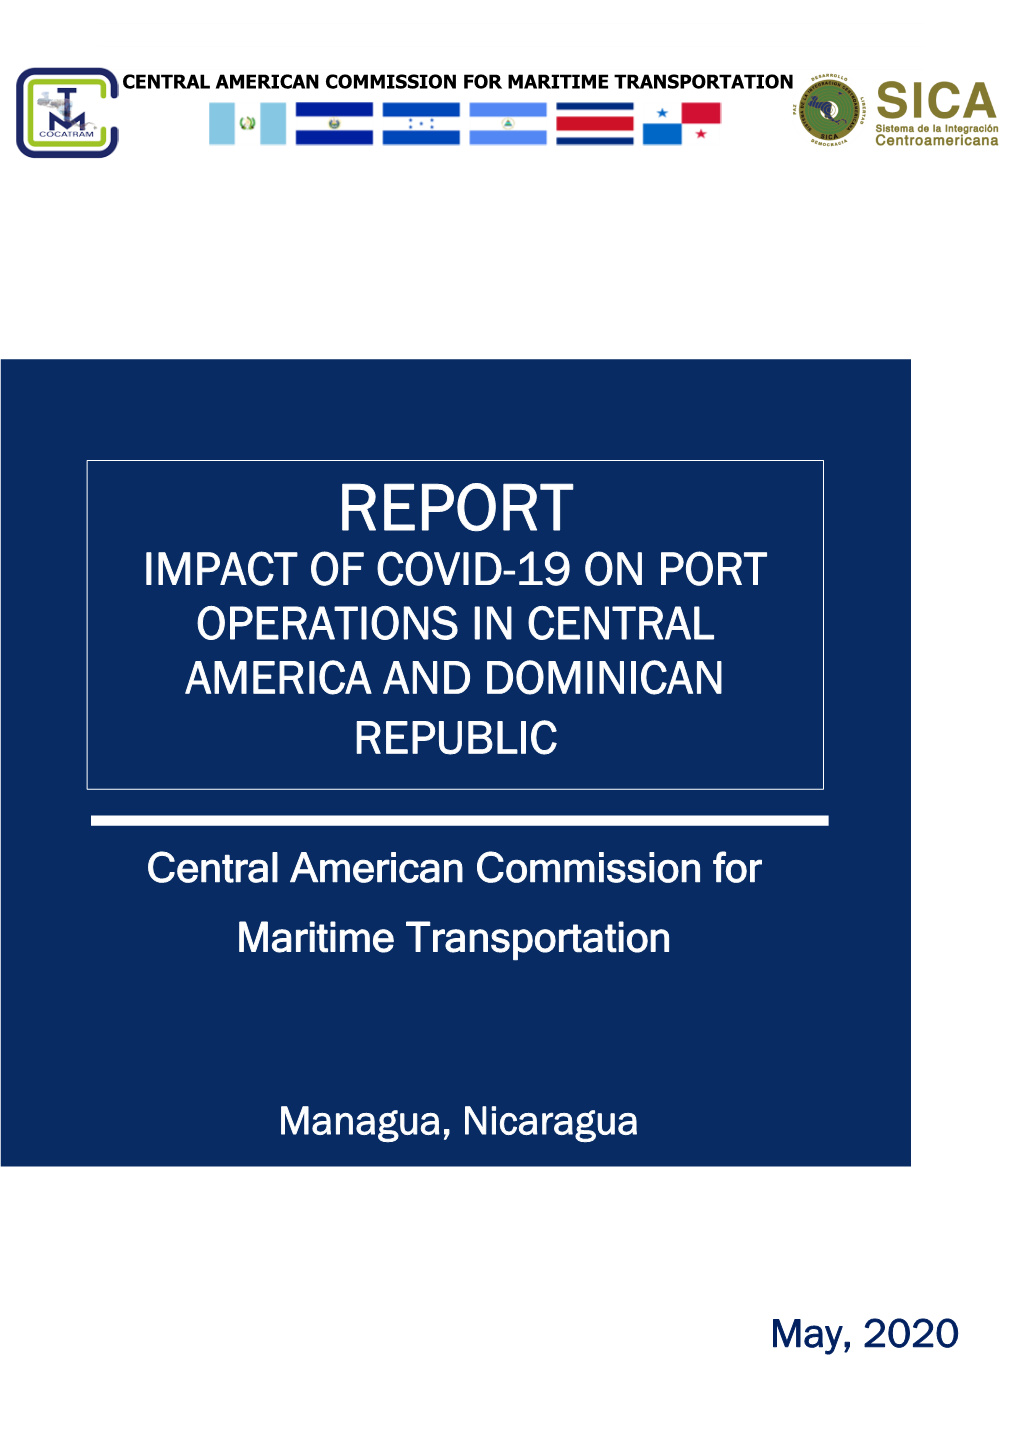 Report Impact of Covid-19 on Port Operations in Central America and Dominican Republic